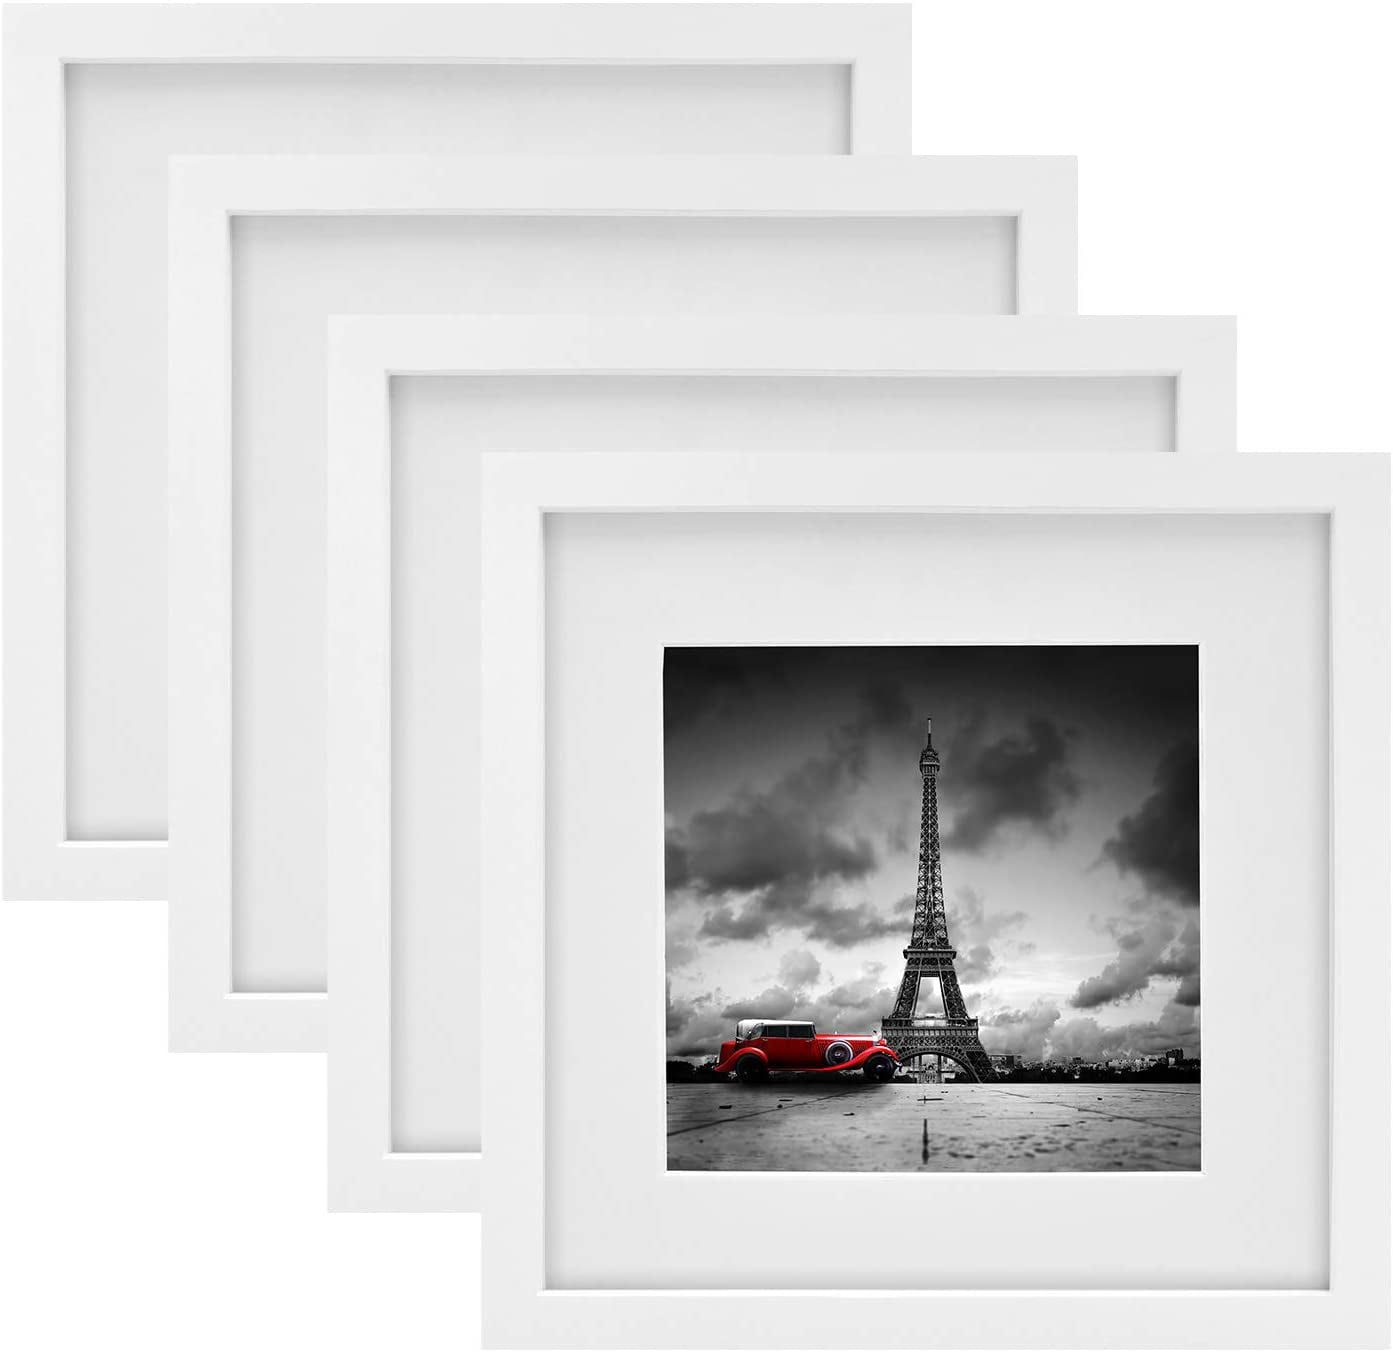 Frame Smart pack of 4 White picture/photo mounts size 10x10 for 8x8 inches 